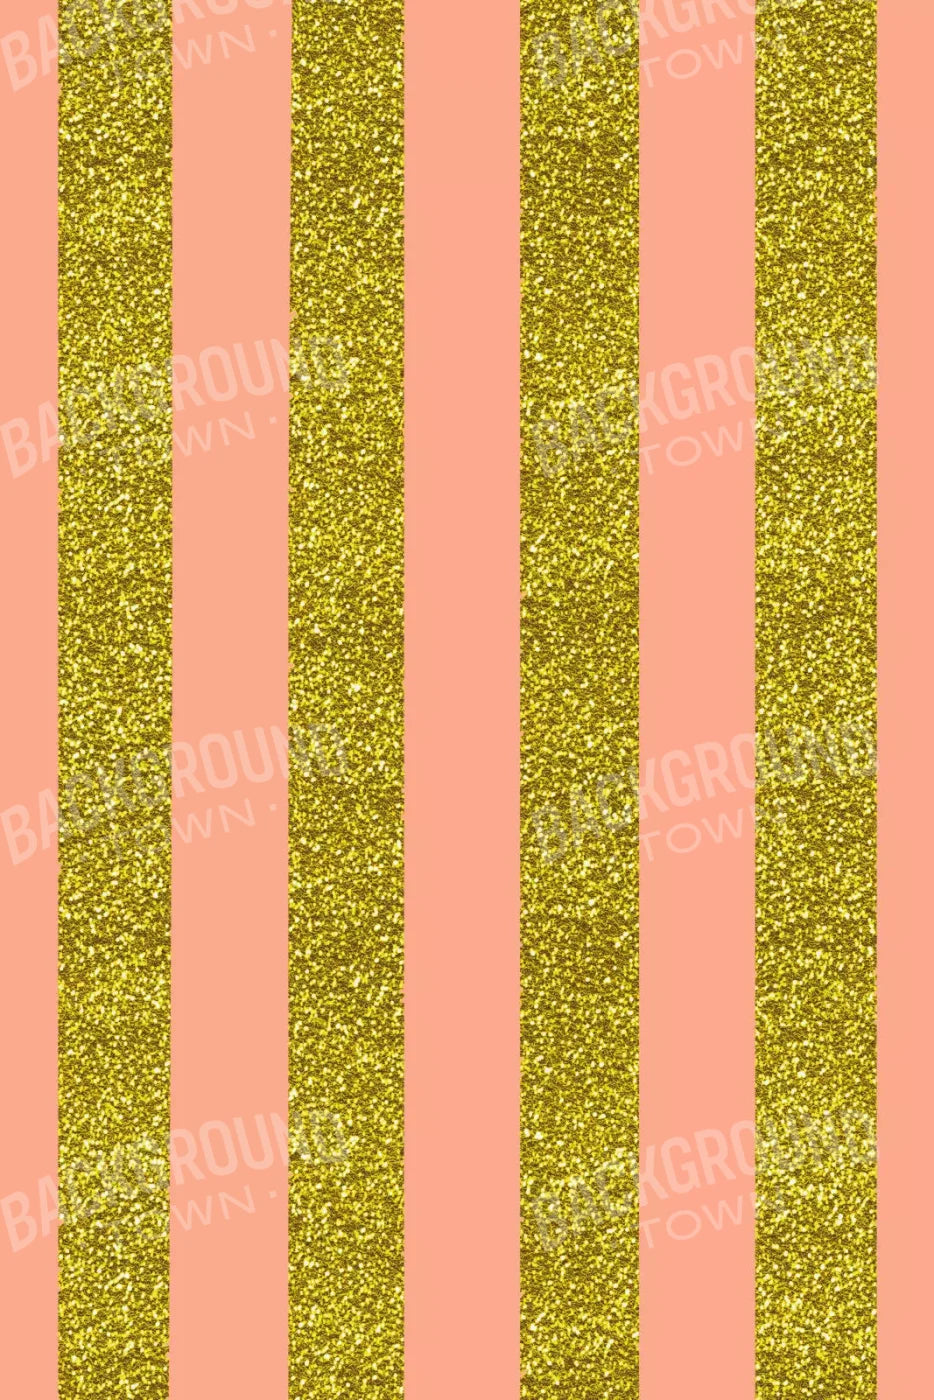 Stripes Coral Gold 5X8 Ultracloth ( 60 X 96 Inch ) Backdrop